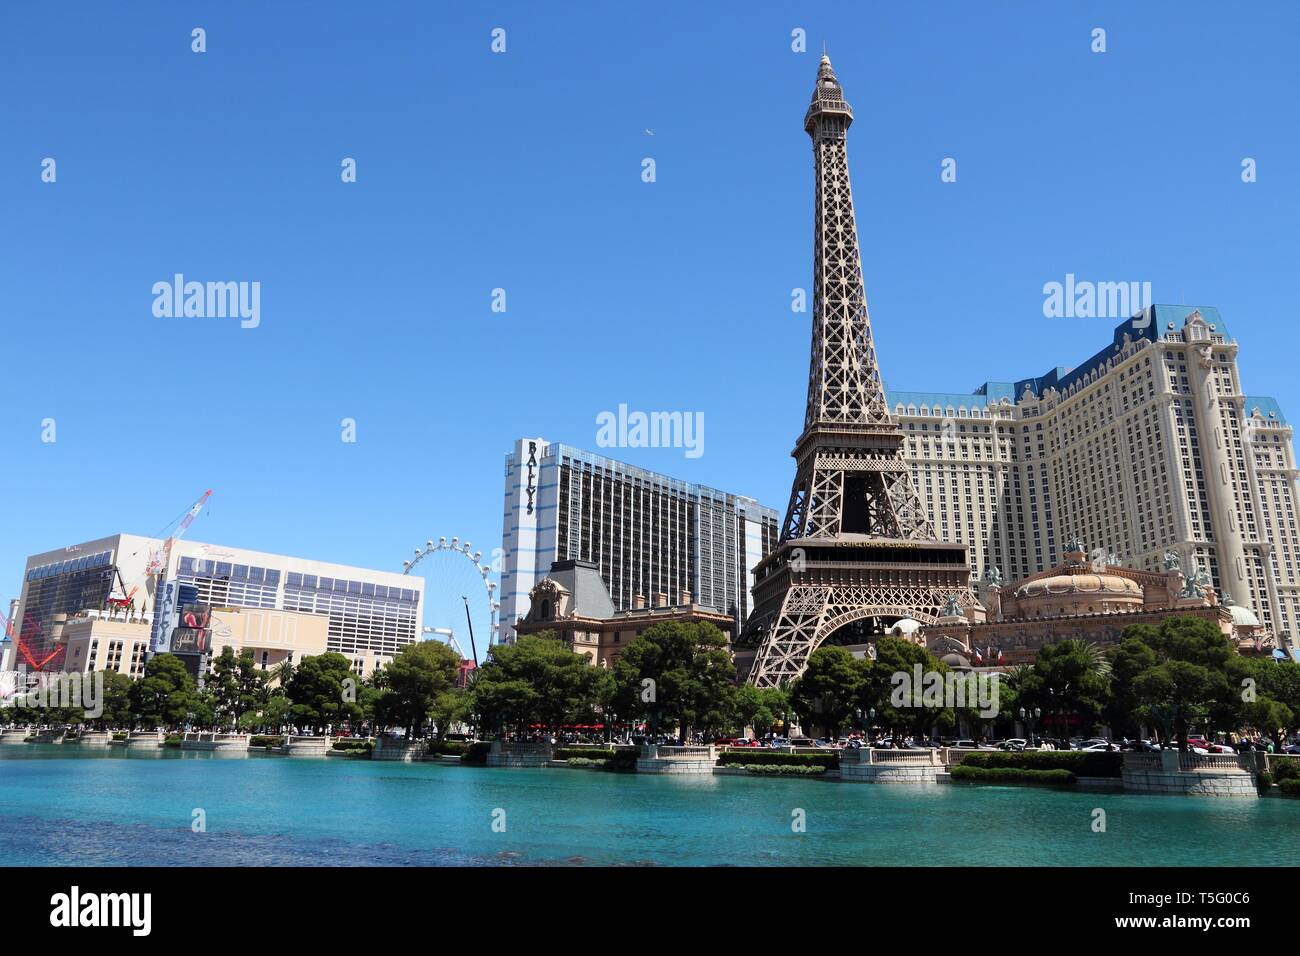 LAS VEGAS, USA - APRIL 14, 2014: People visit Paris Las Vegas casino hotel in Las Vegas. The hotel is among 30 largest hotels in the world with 2,916  Stock Photo